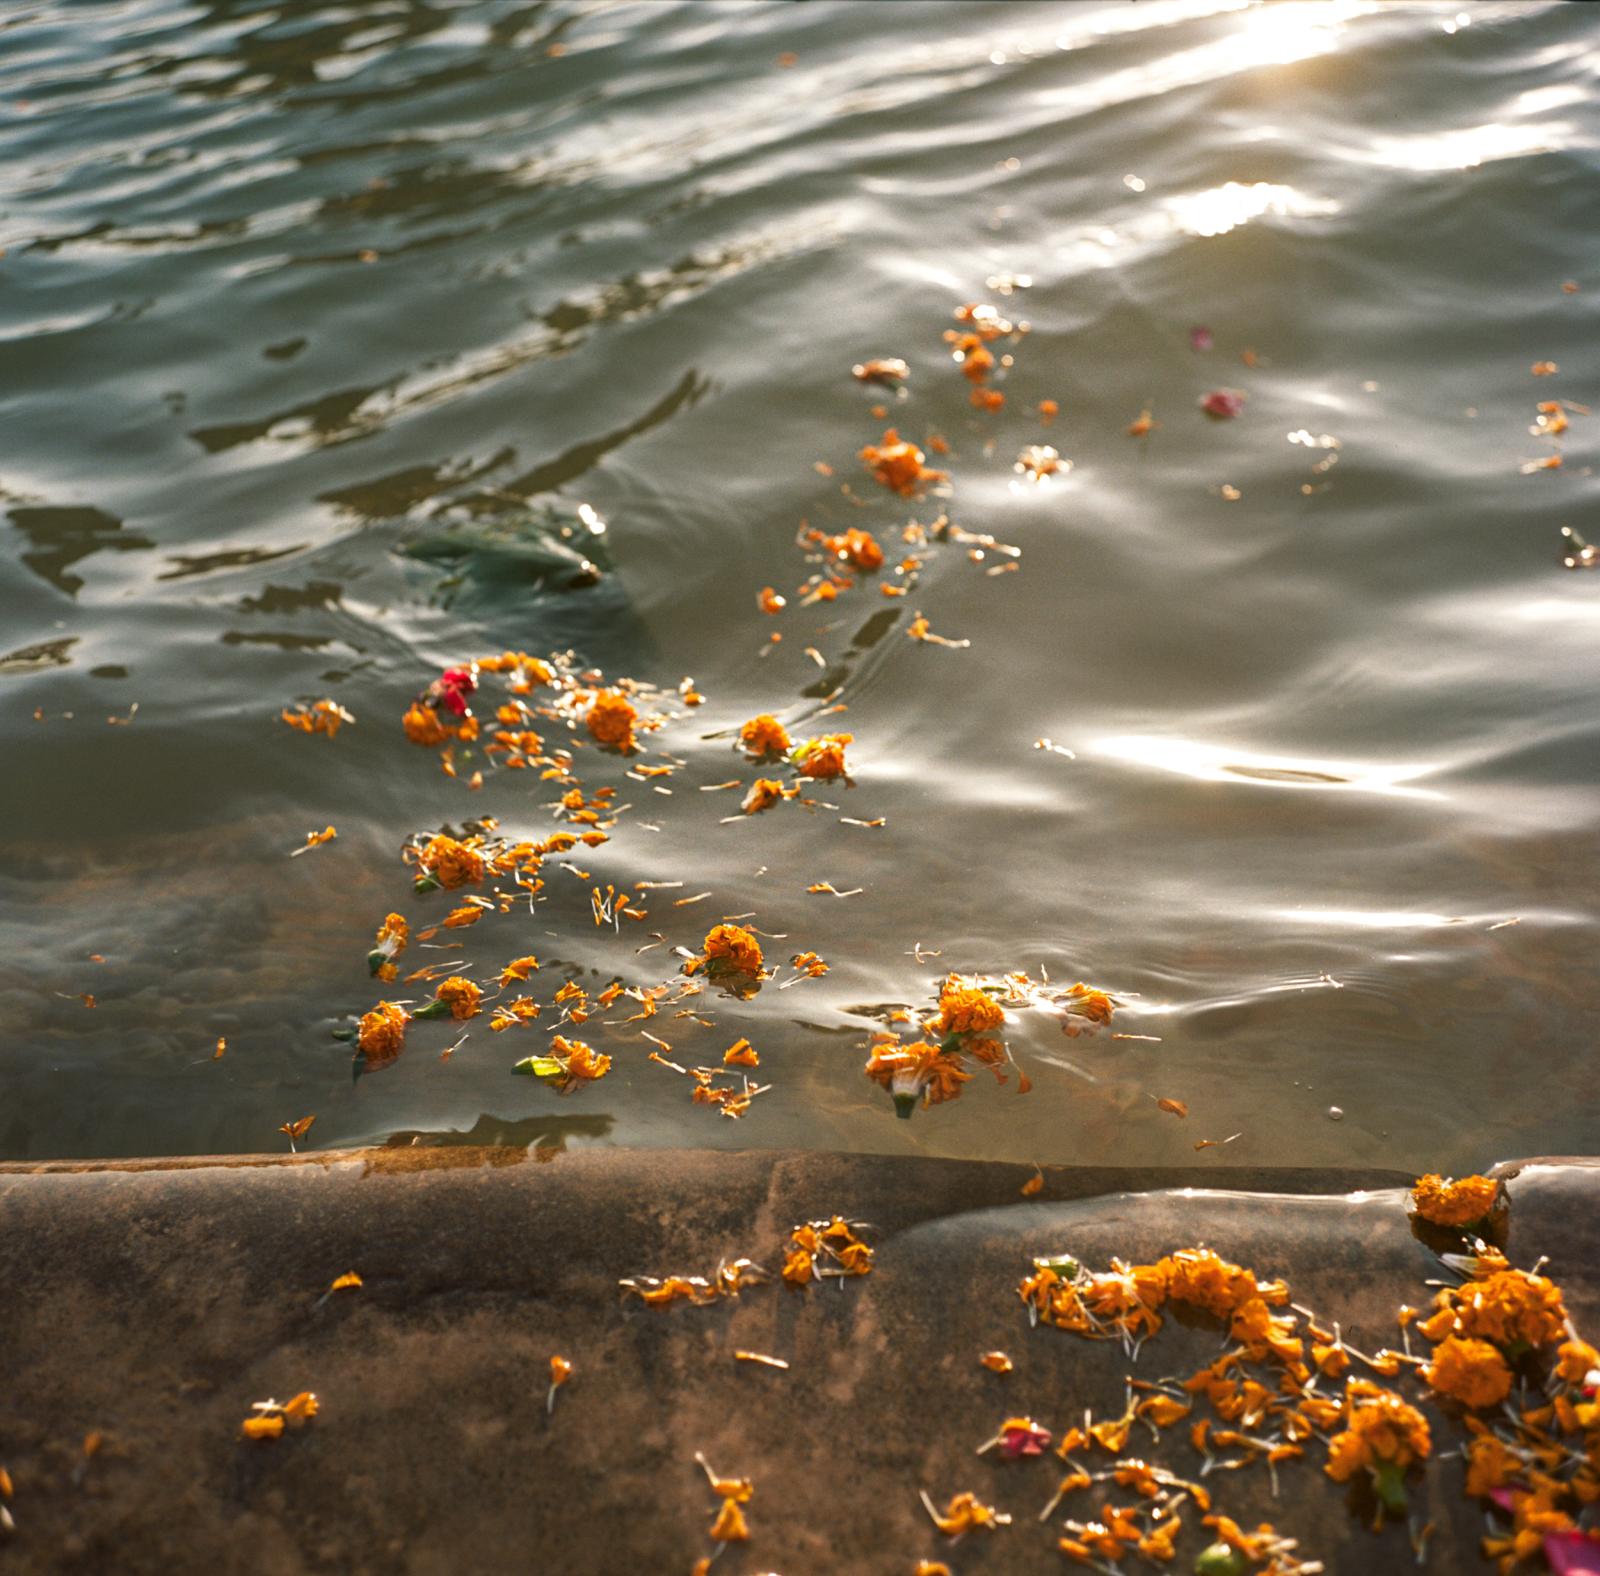 Saving India's Holiest River? - Flowers are offered to the river at Har Ki Pauri ghat in...